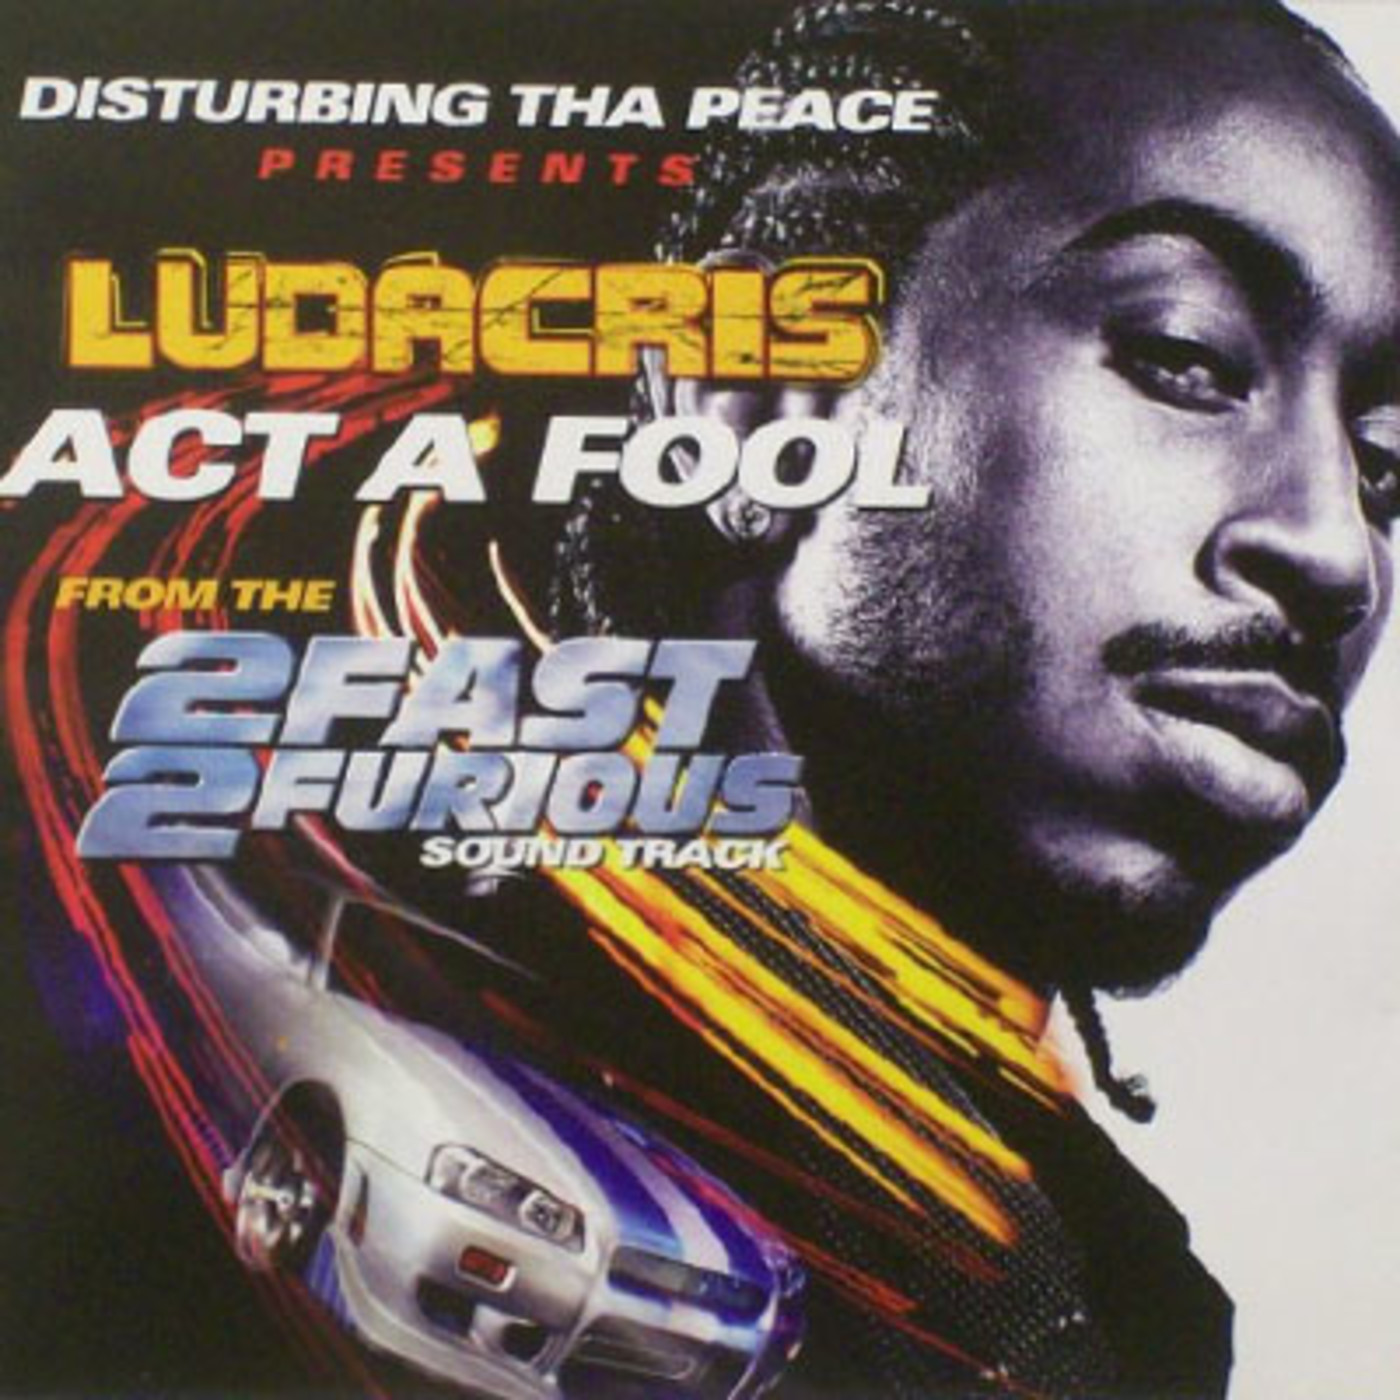 what instruments are in ludacris act a fool song